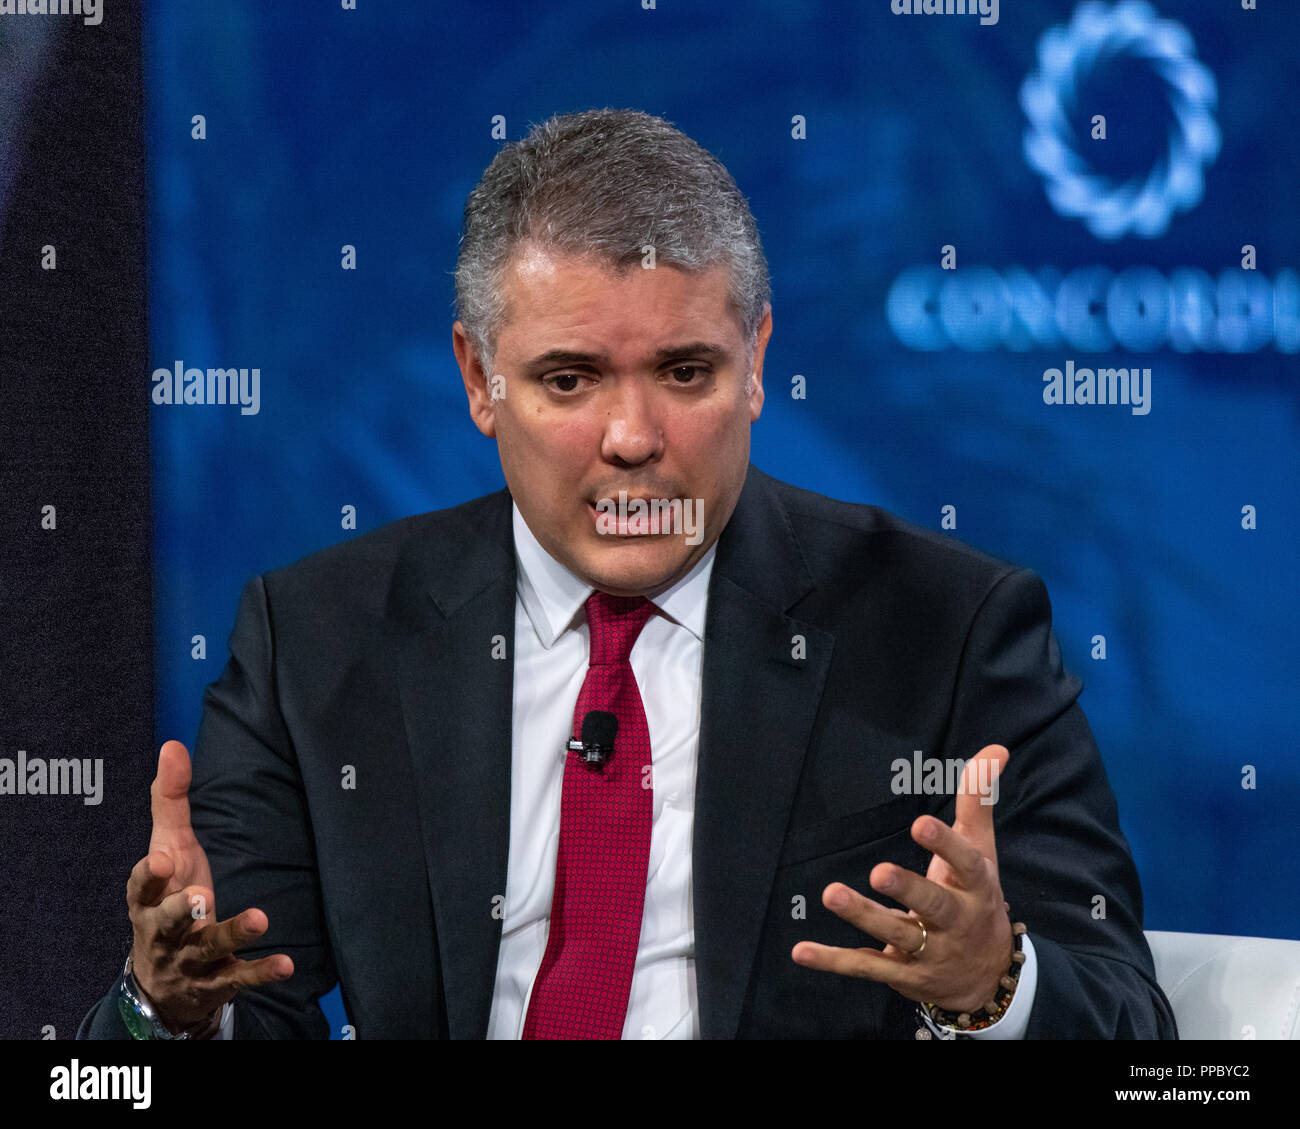 New York, USA, 24 September 2018. Colombian President Ivan Duque speaks at the Concordia Summit in New York city. Photo by Enrique Shore Credit: Enrique Shore/Alamy Live News Stock Photo